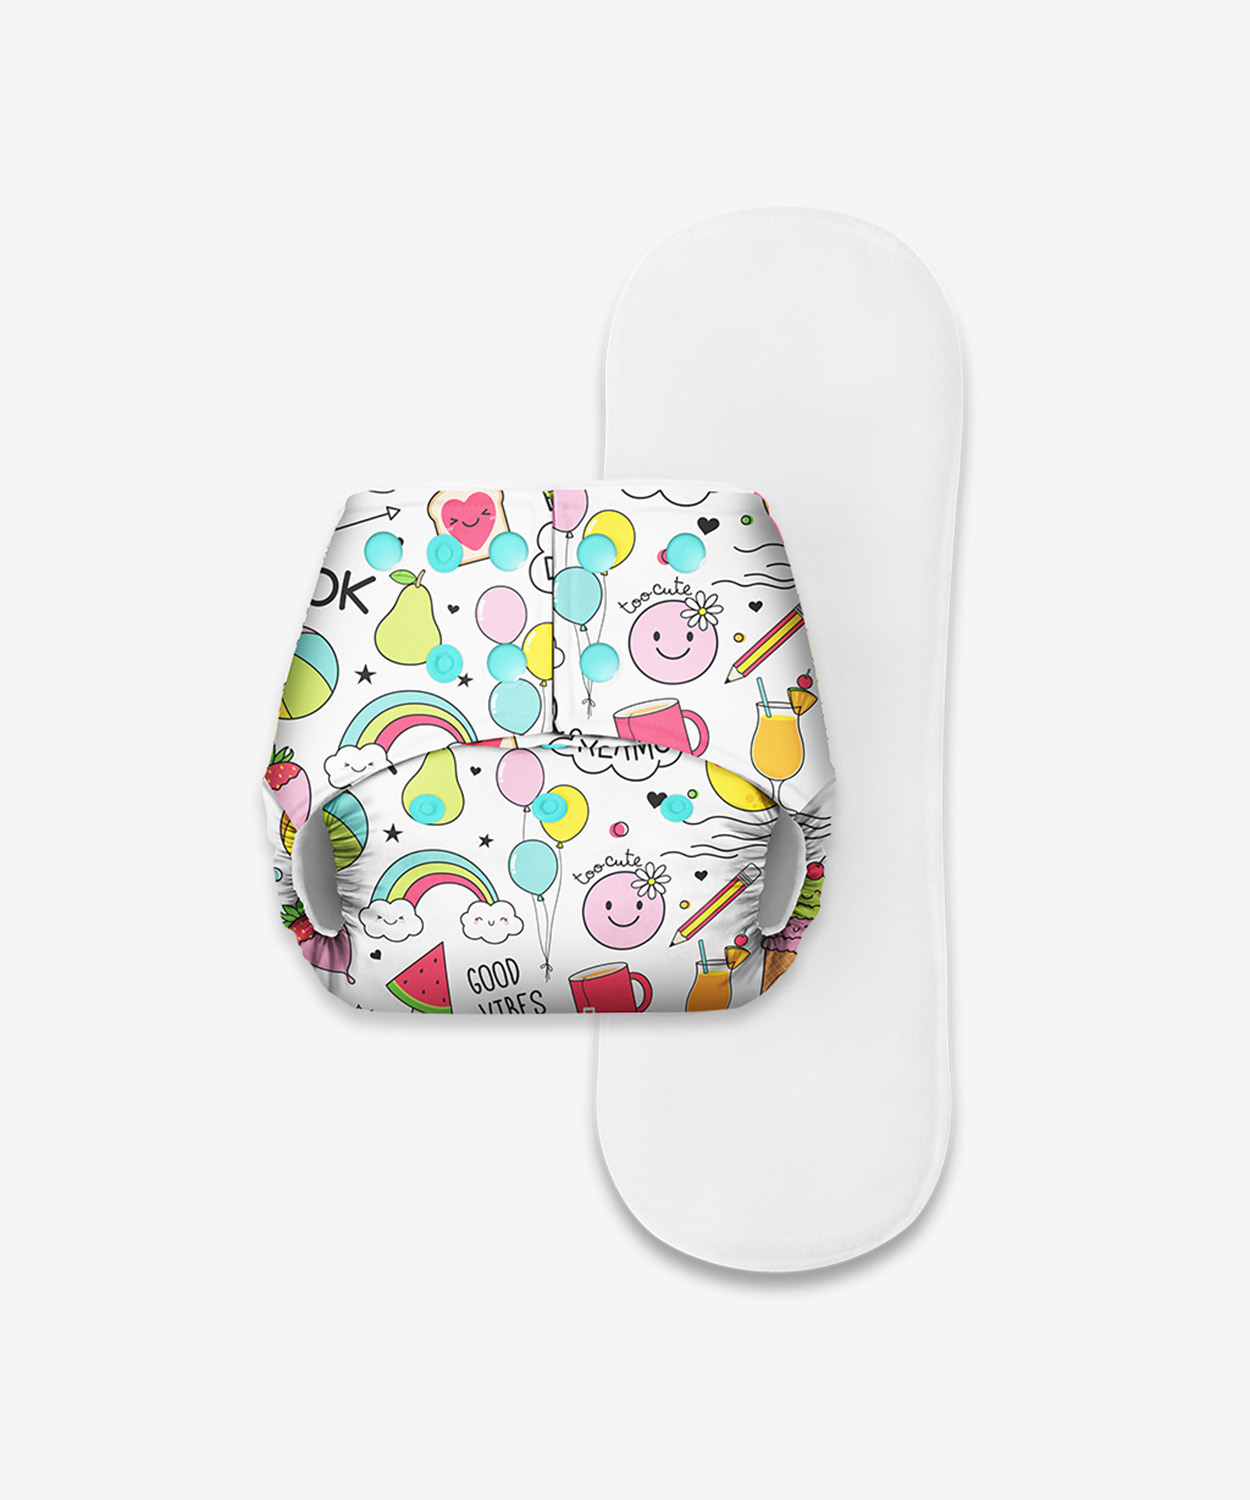 Basic Pocket Diaper - Freesize Adjustable, Washable and Reusable pocket cloth diaper for day time use (with dry feel pad/soaker/insert)(Doodles)